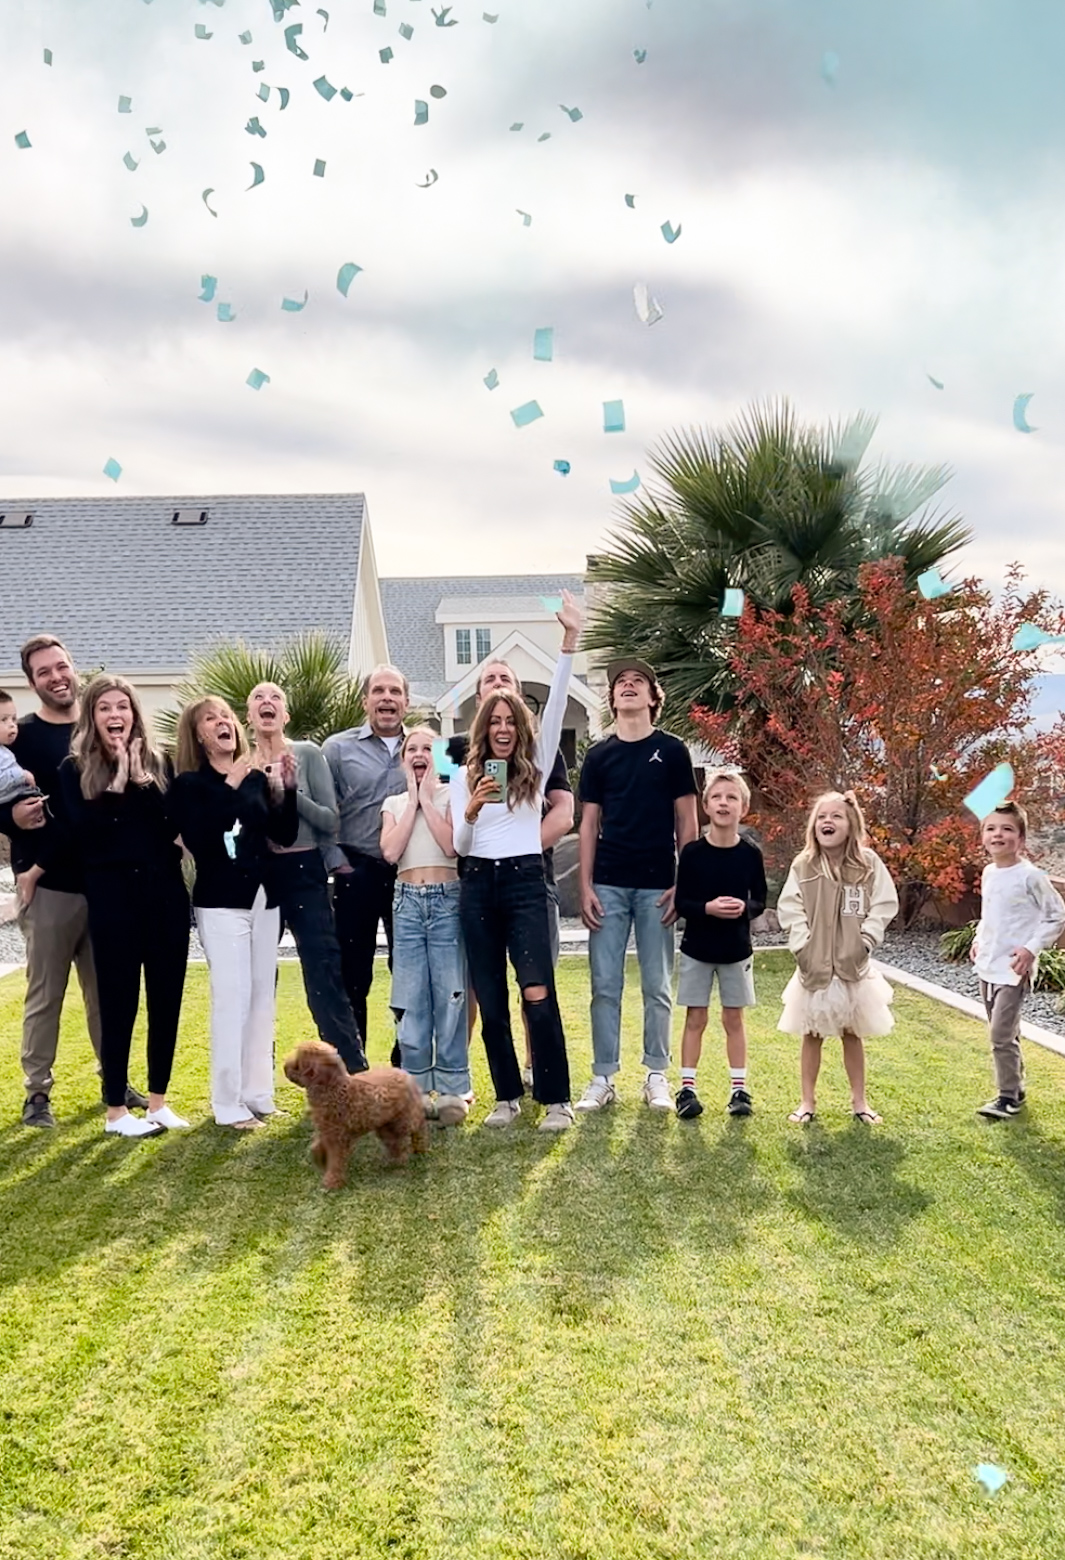 Kailee Wright: Family Gender Reveal